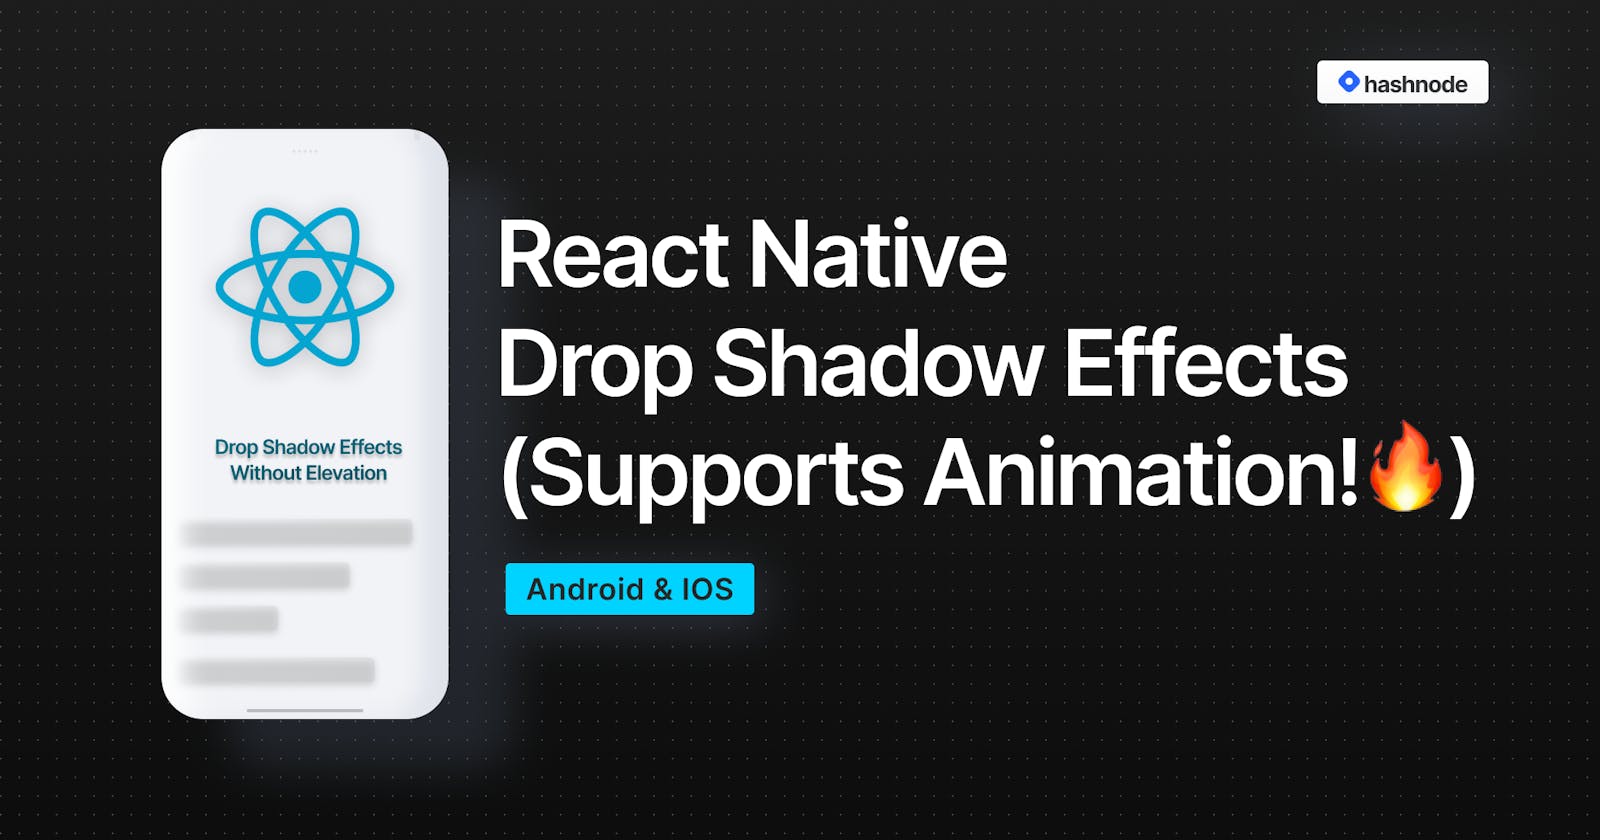 React Native: How to add drop shadow effects on Android - supports animation!